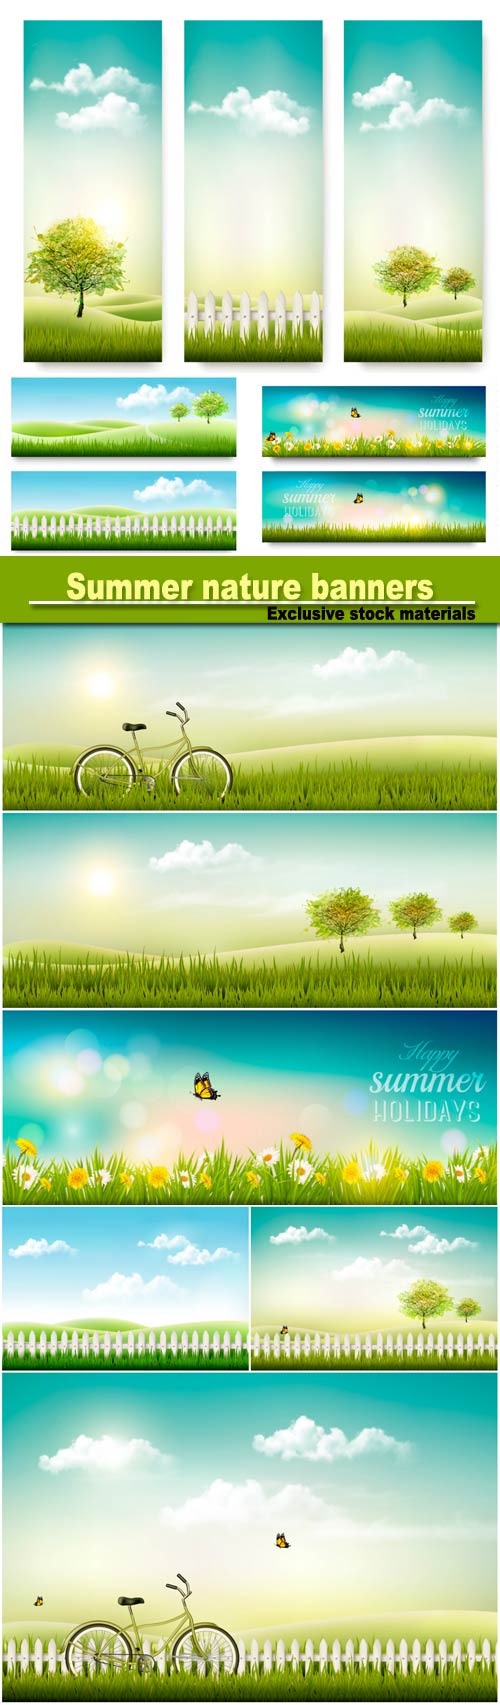 Summer nature banners with green trees and sun